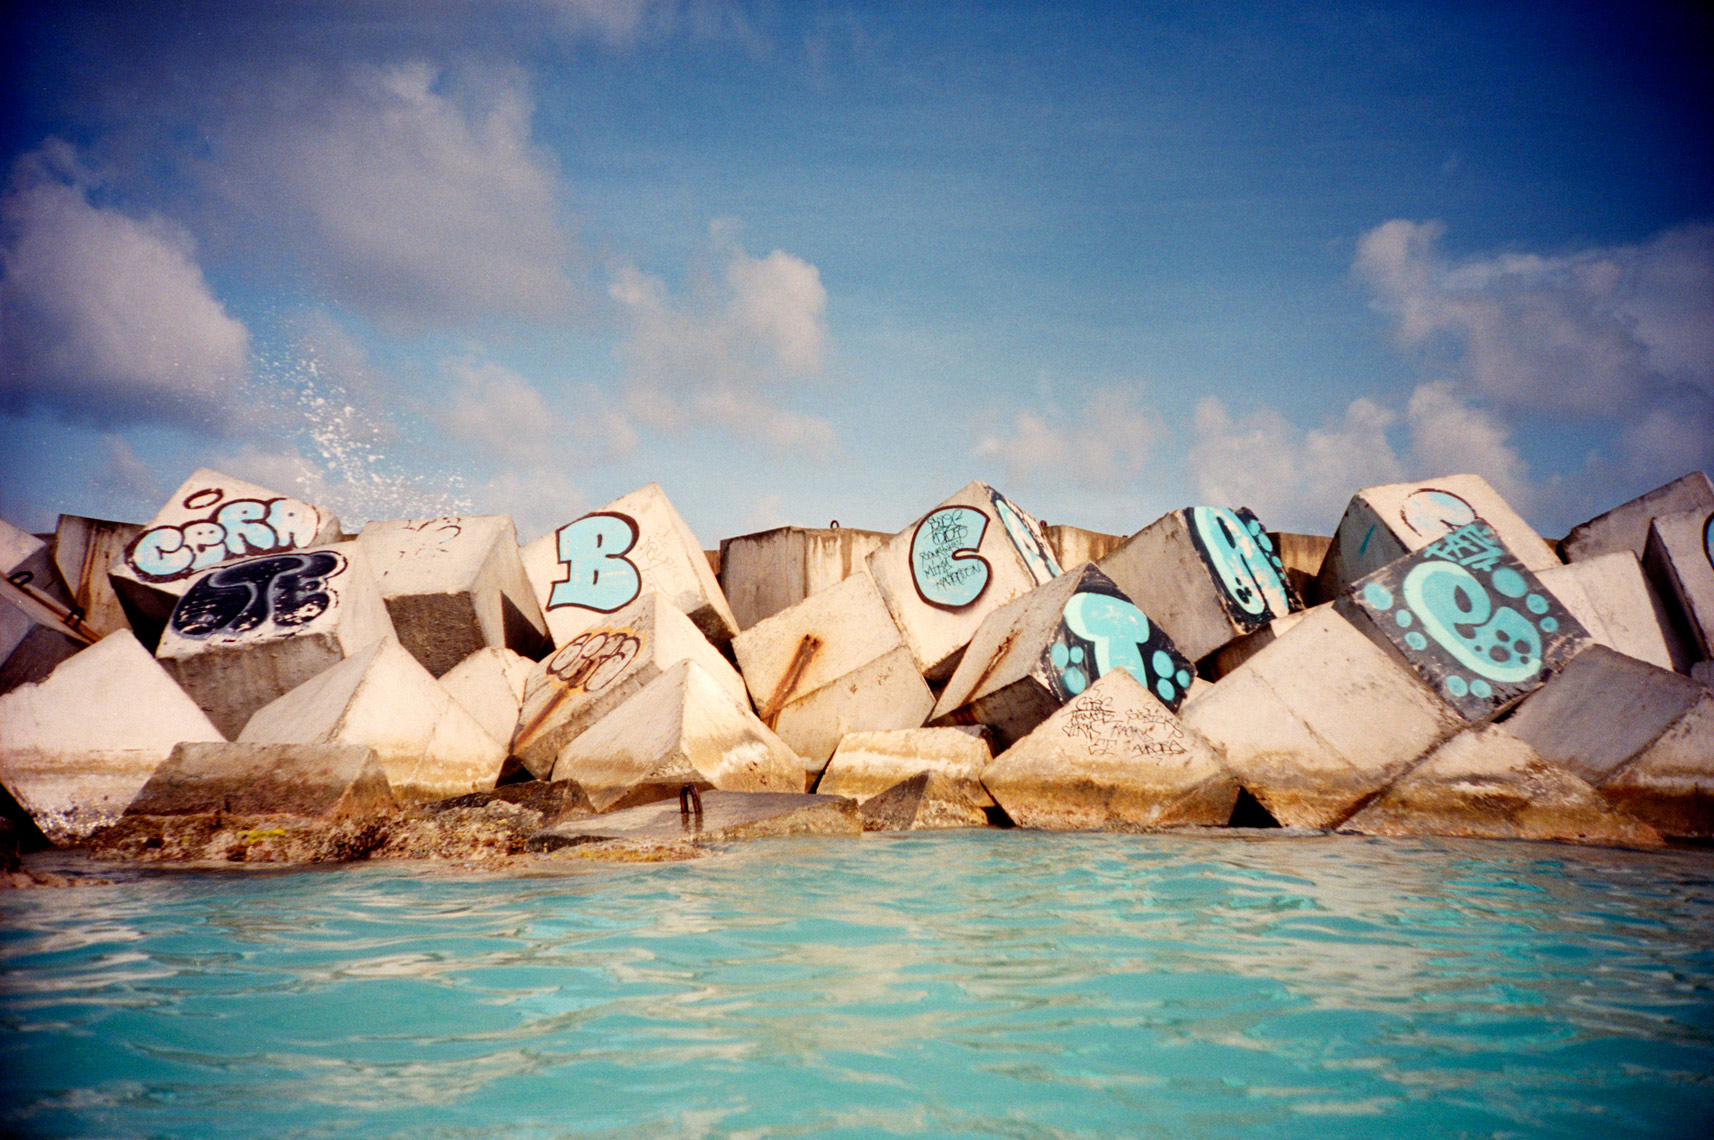 Webb Chappell photograph of jetty Cancun in Cancun Mexico